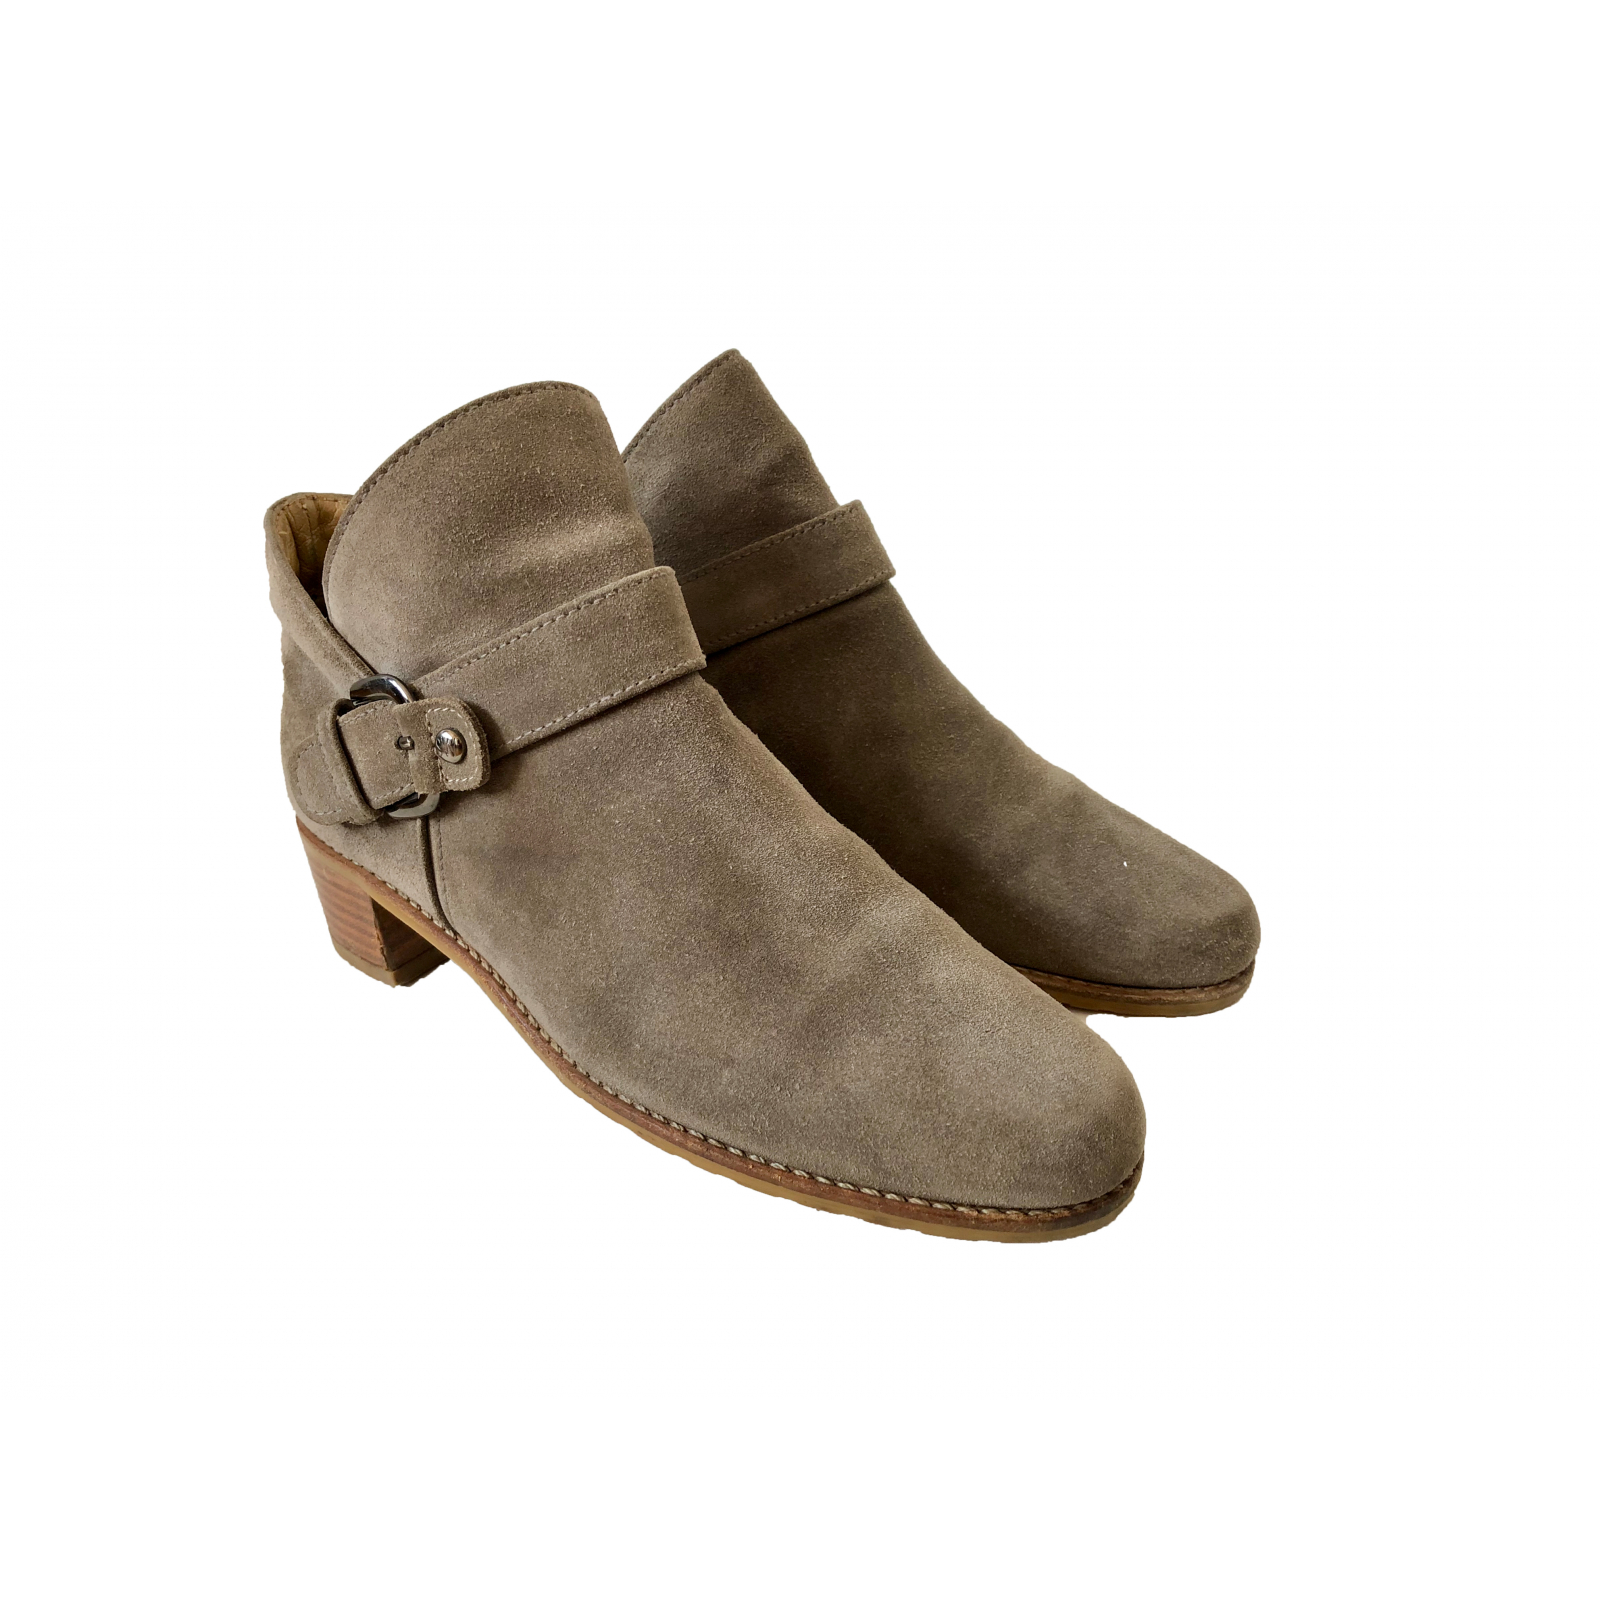 STUART WEITZMAN DUDE Taupe Suede Buckled Ankle